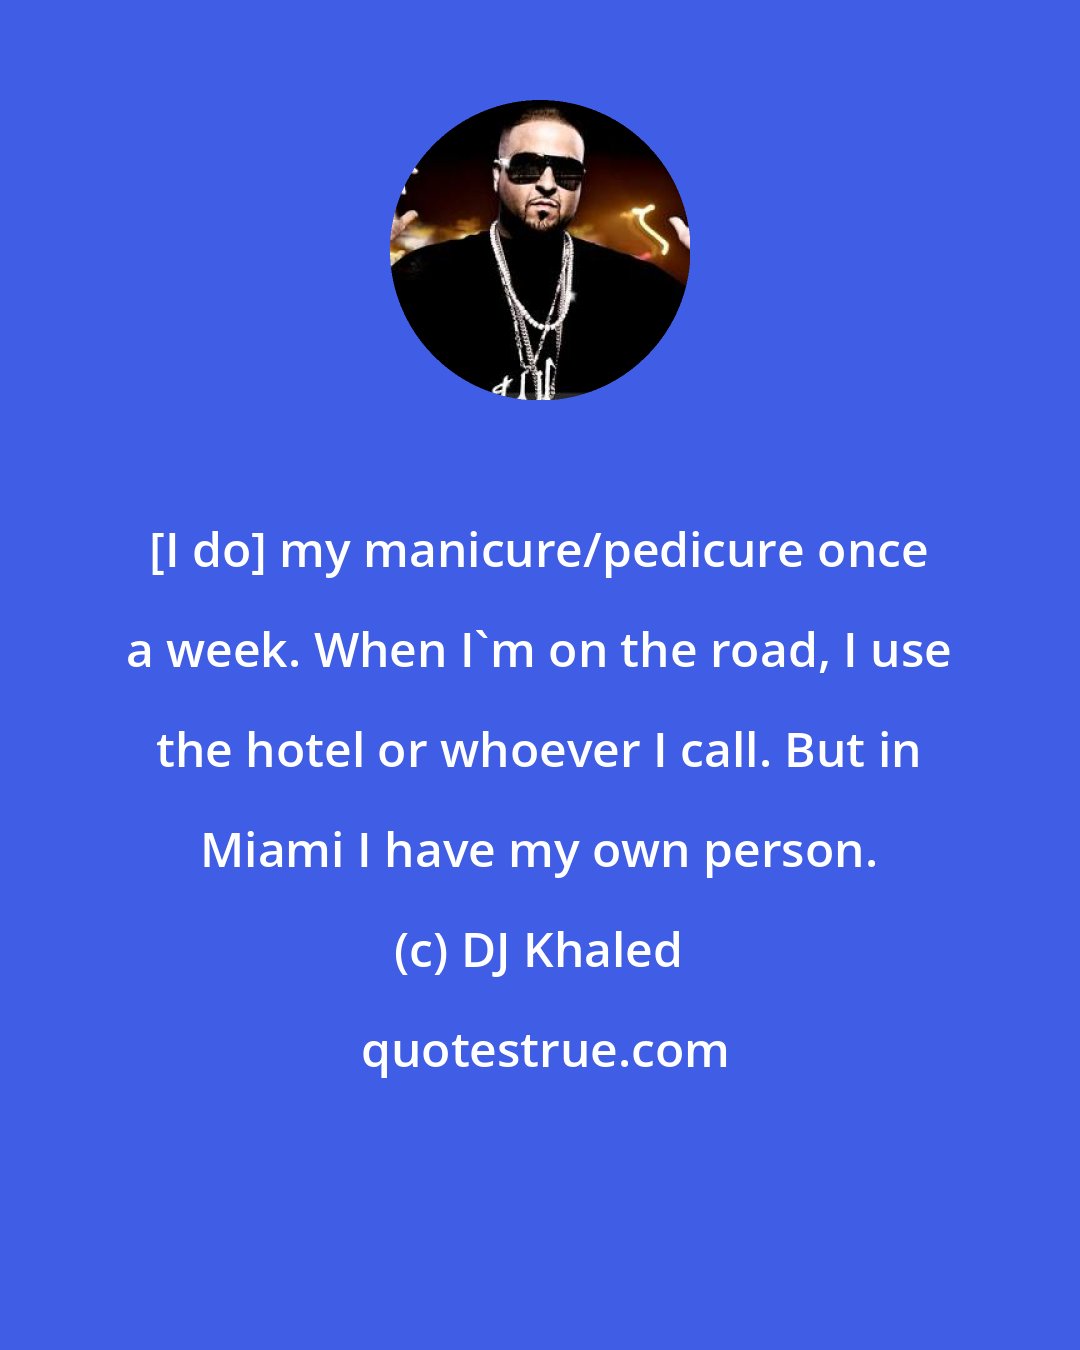 DJ Khaled: [I do] my manicure/pedicure once a week. When I'm on the road, I use the hotel or whoever I call. But in Miami I have my own person.